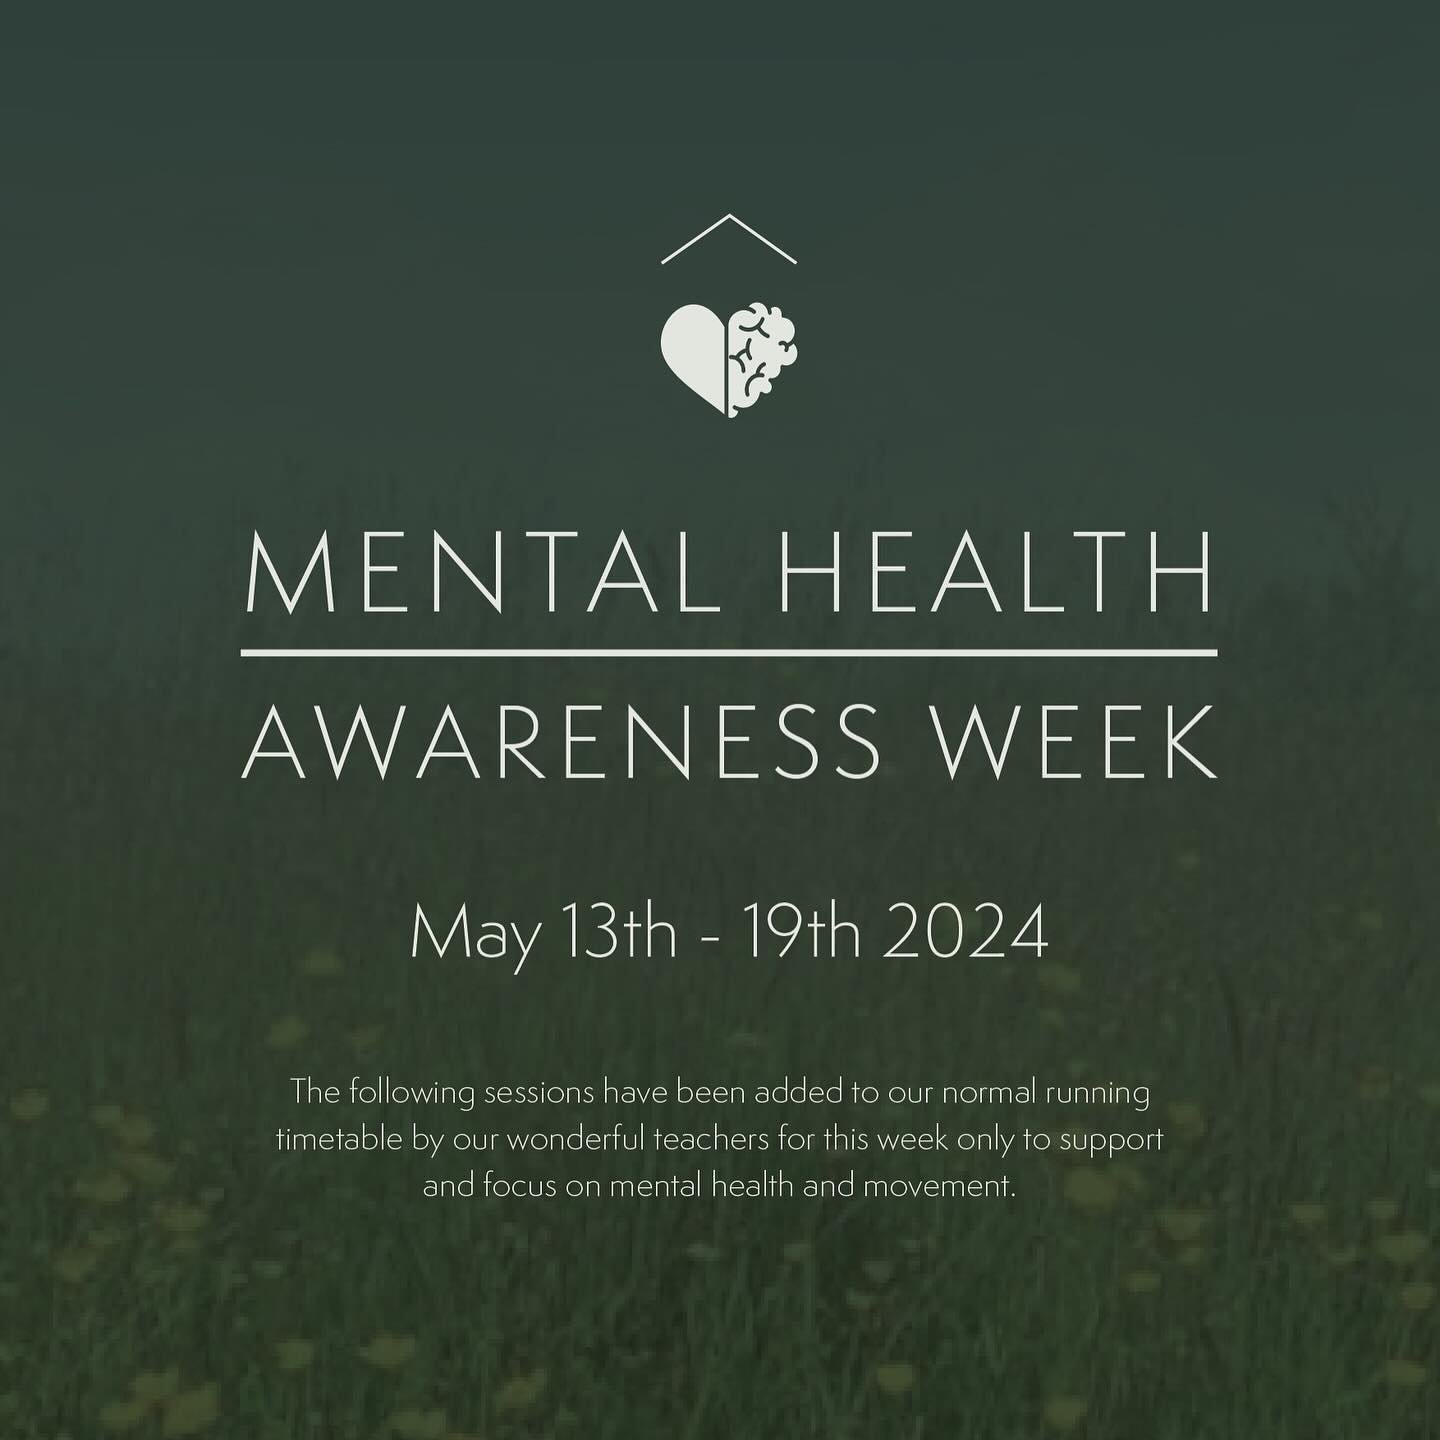 To acknowledge Mental Health Awareness week this year we have added extra classes to our usual timetable that we hope you&rsquo;ll be able to come along to.

The team wanted to support this year&rsquo;s theme of Movement by addressing the link betwee